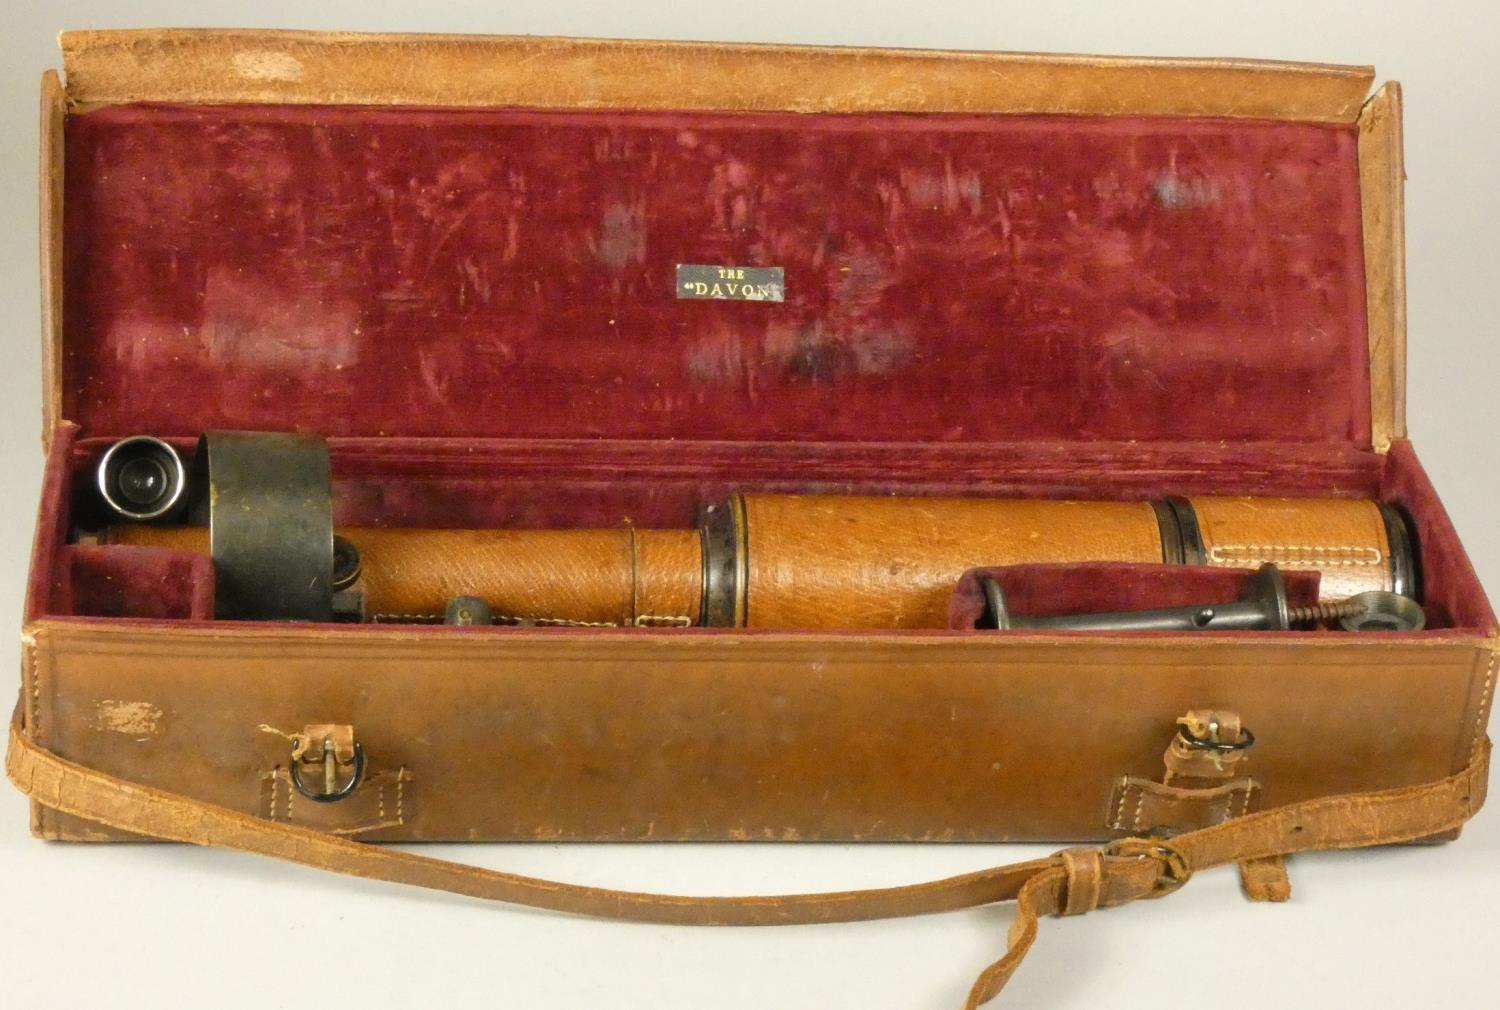 F. Davidson, London, a Davon telescope, leather covered, 37 cm, together with various fittings, - Image 4 of 5